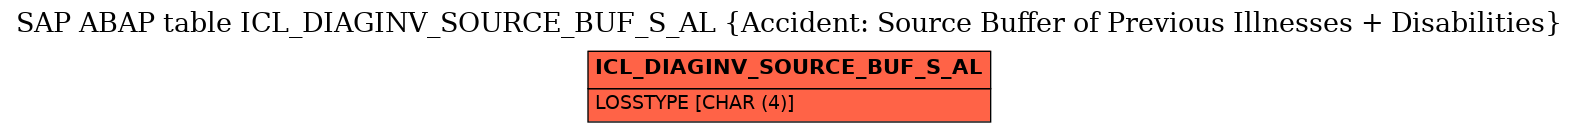 E-R Diagram for table ICL_DIAGINV_SOURCE_BUF_S_AL (Accident: Source Buffer of Previous Illnesses + Disabilities)